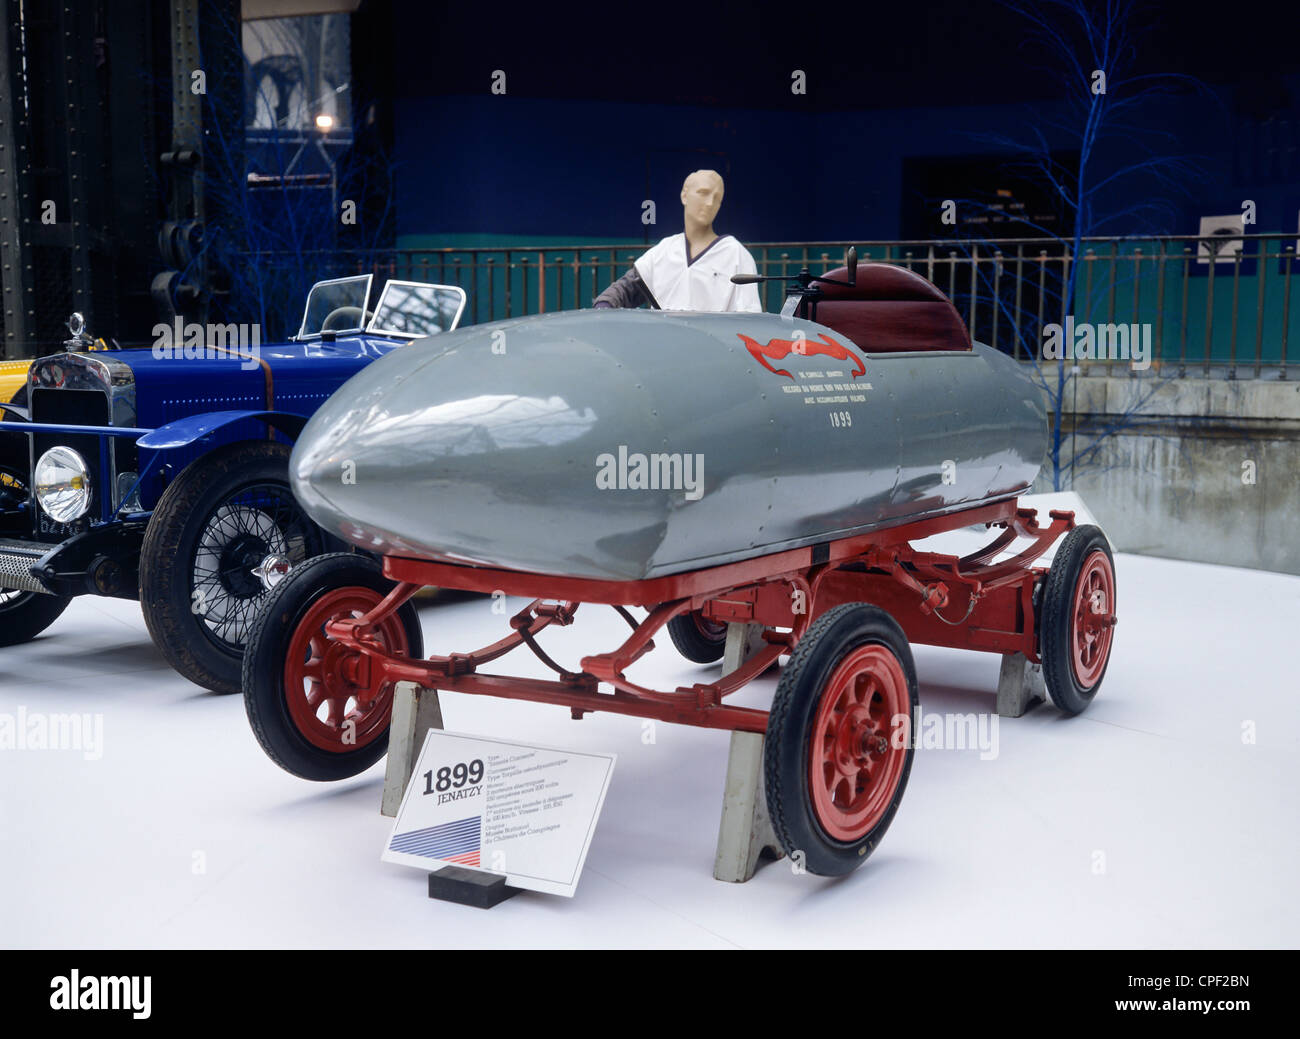 Original Jenatzy 'Jamais Contente' “Never satisfied” 1899 French electric motor, vintage car, first car over 100km/h, streamlined body, France, Europe Stock Photo